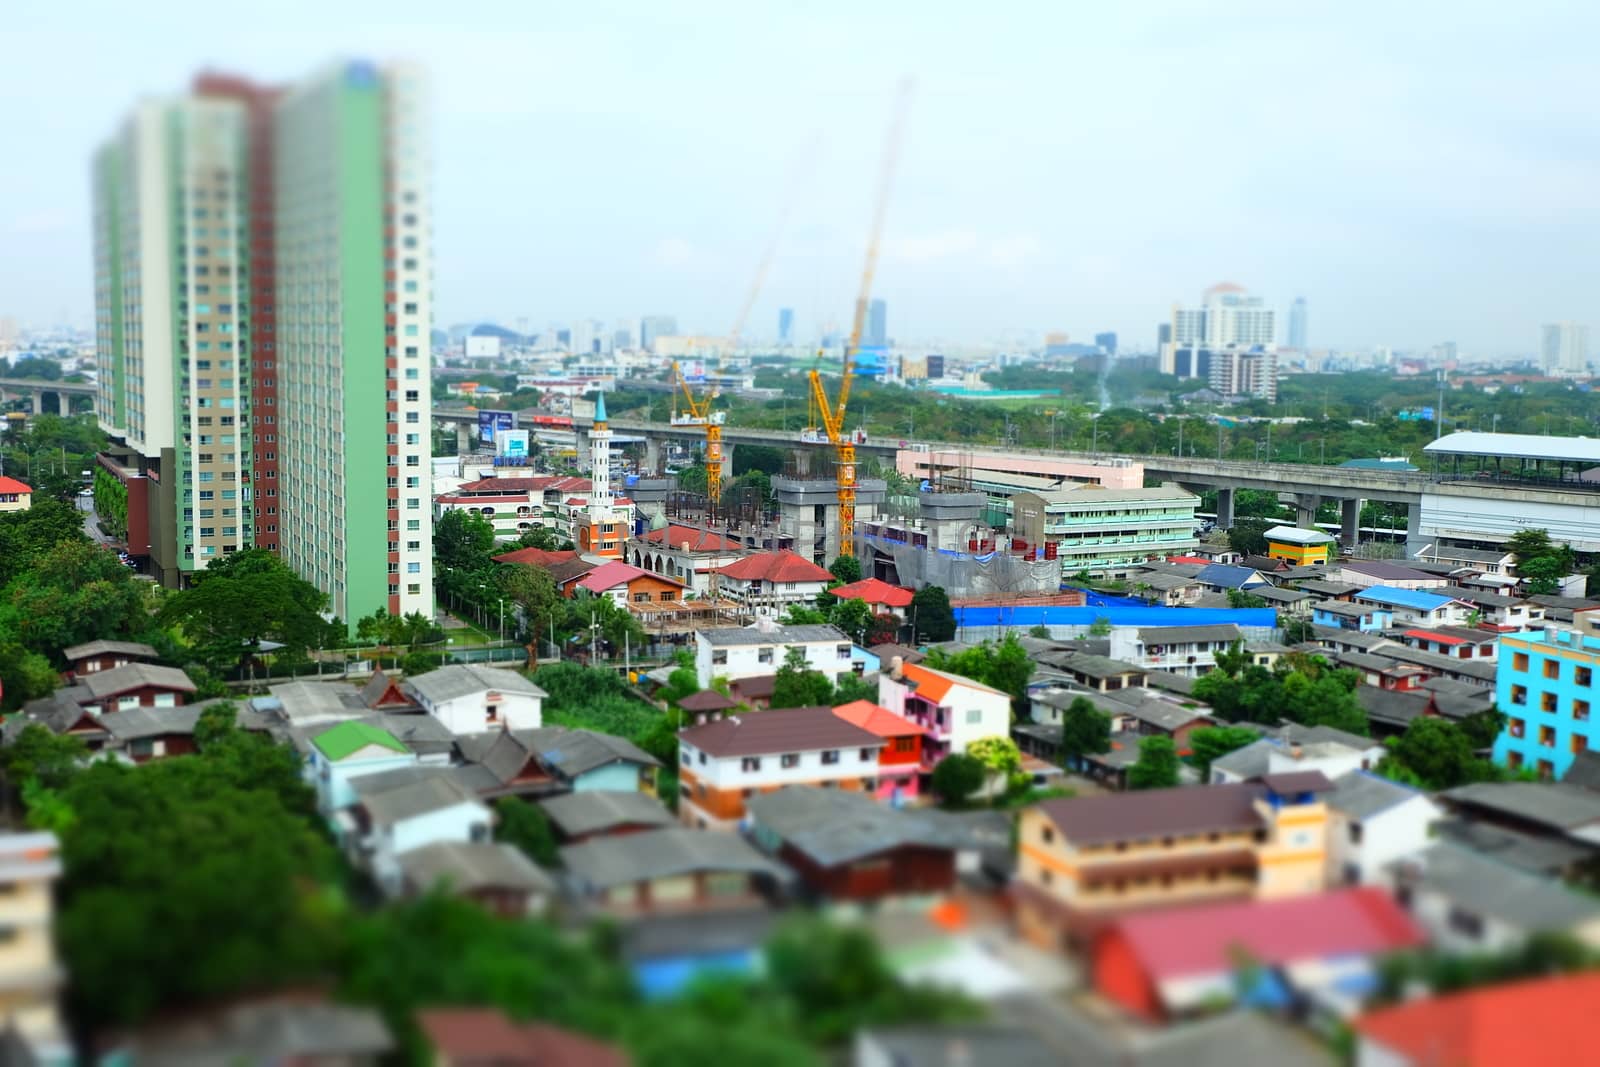 Aerial views of Cityscape in Tilt Shift Effect. by mesamong